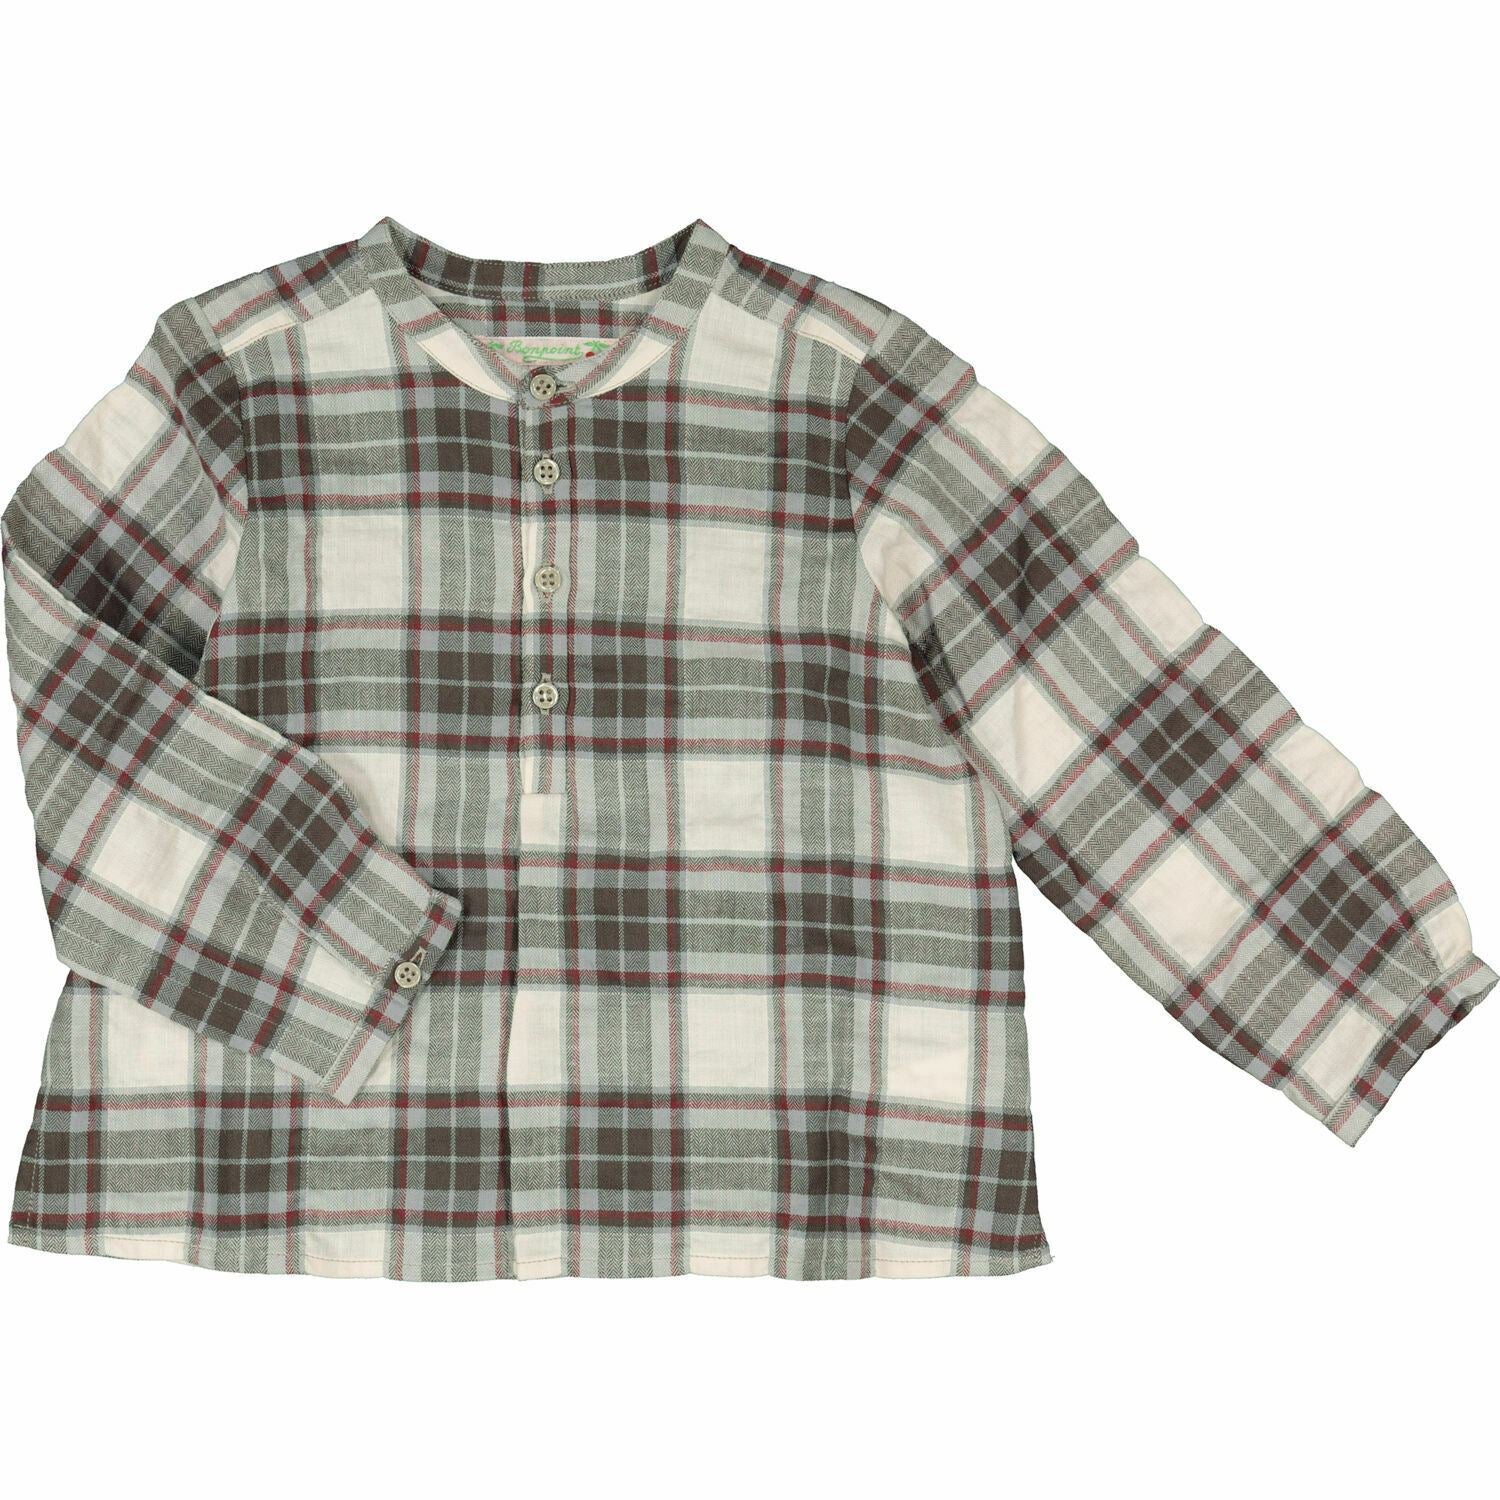 BONPOINT Baby Girls' Long Sleeve Checked Shirt Top, White/Red/Grey,18 months